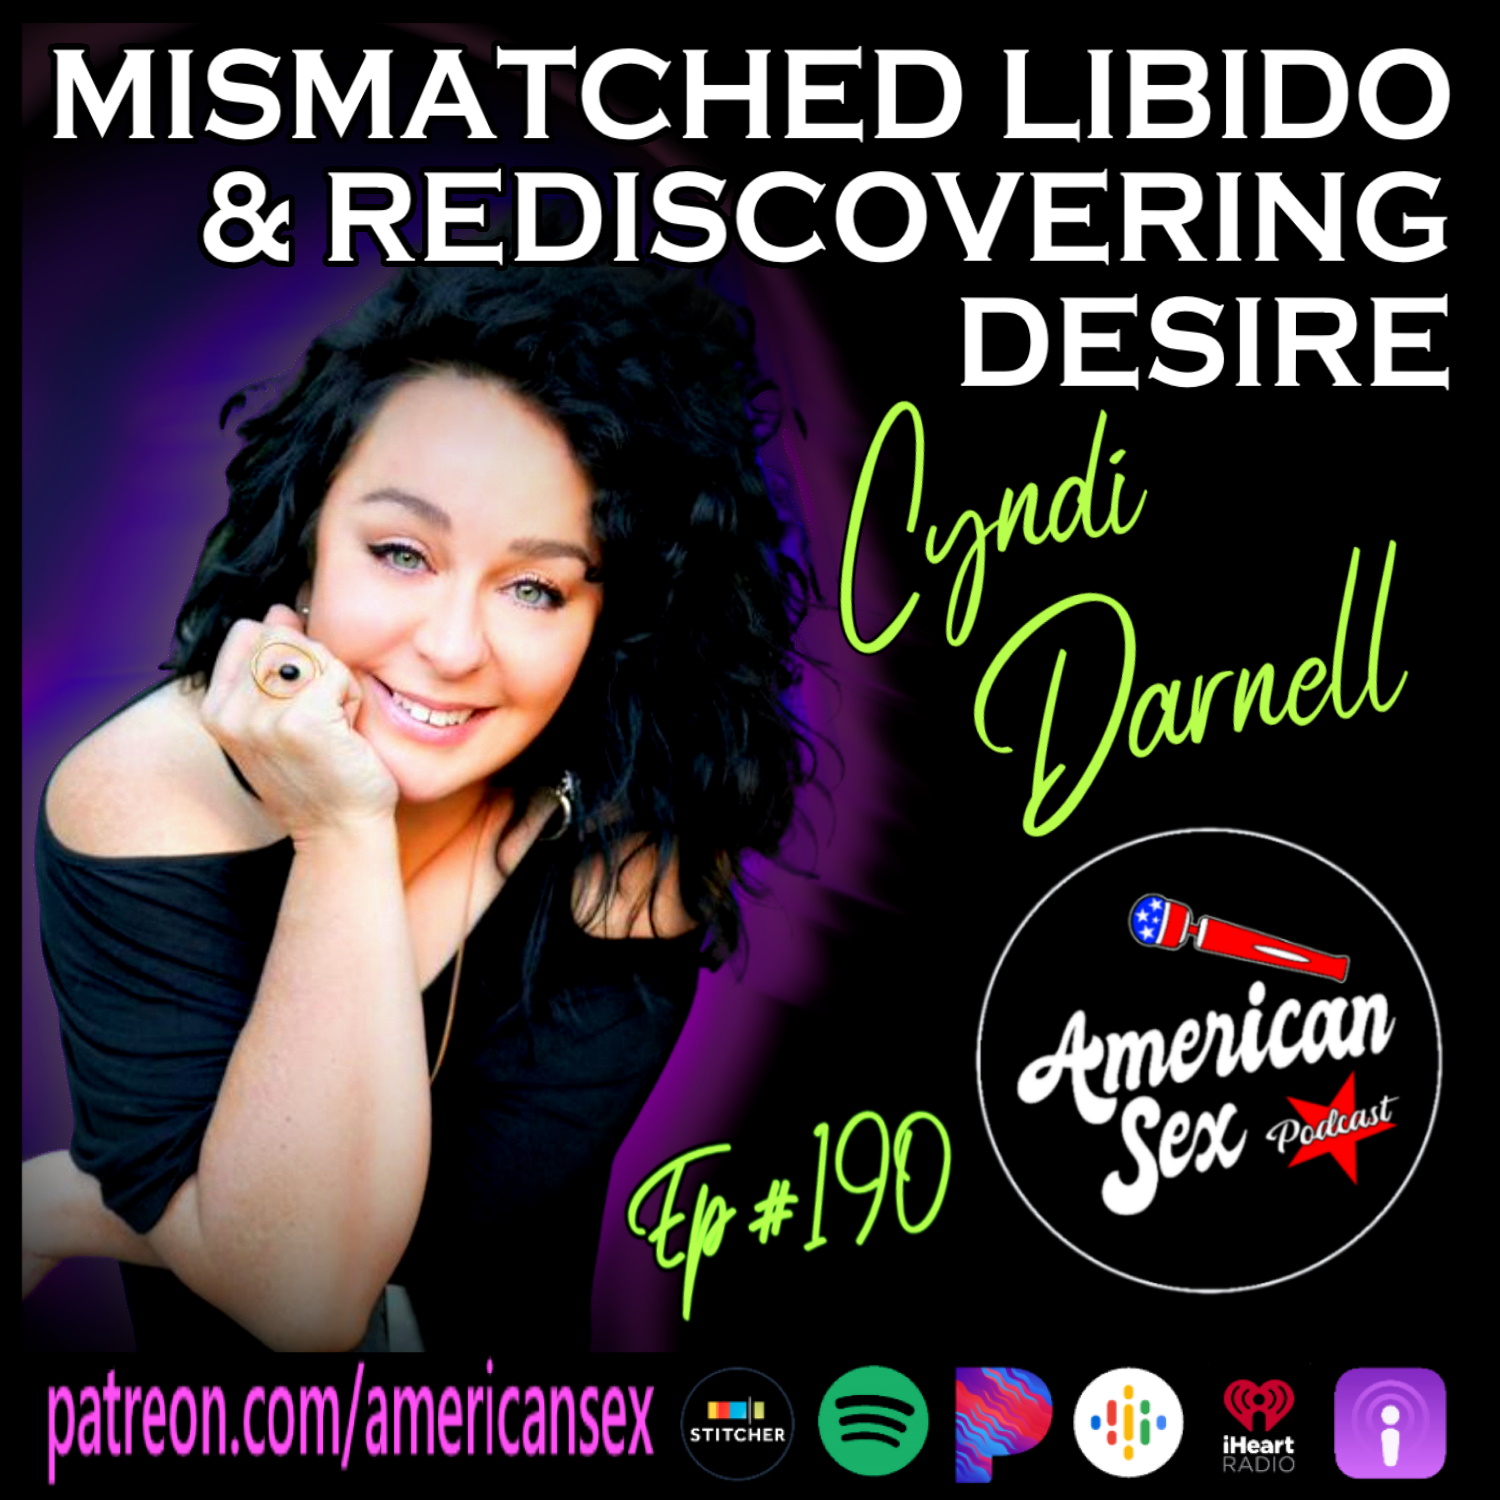 Cyndi Darnell Mismatched Libido & Rediscovering Desire - American Sex Podcast episode 190 cover art